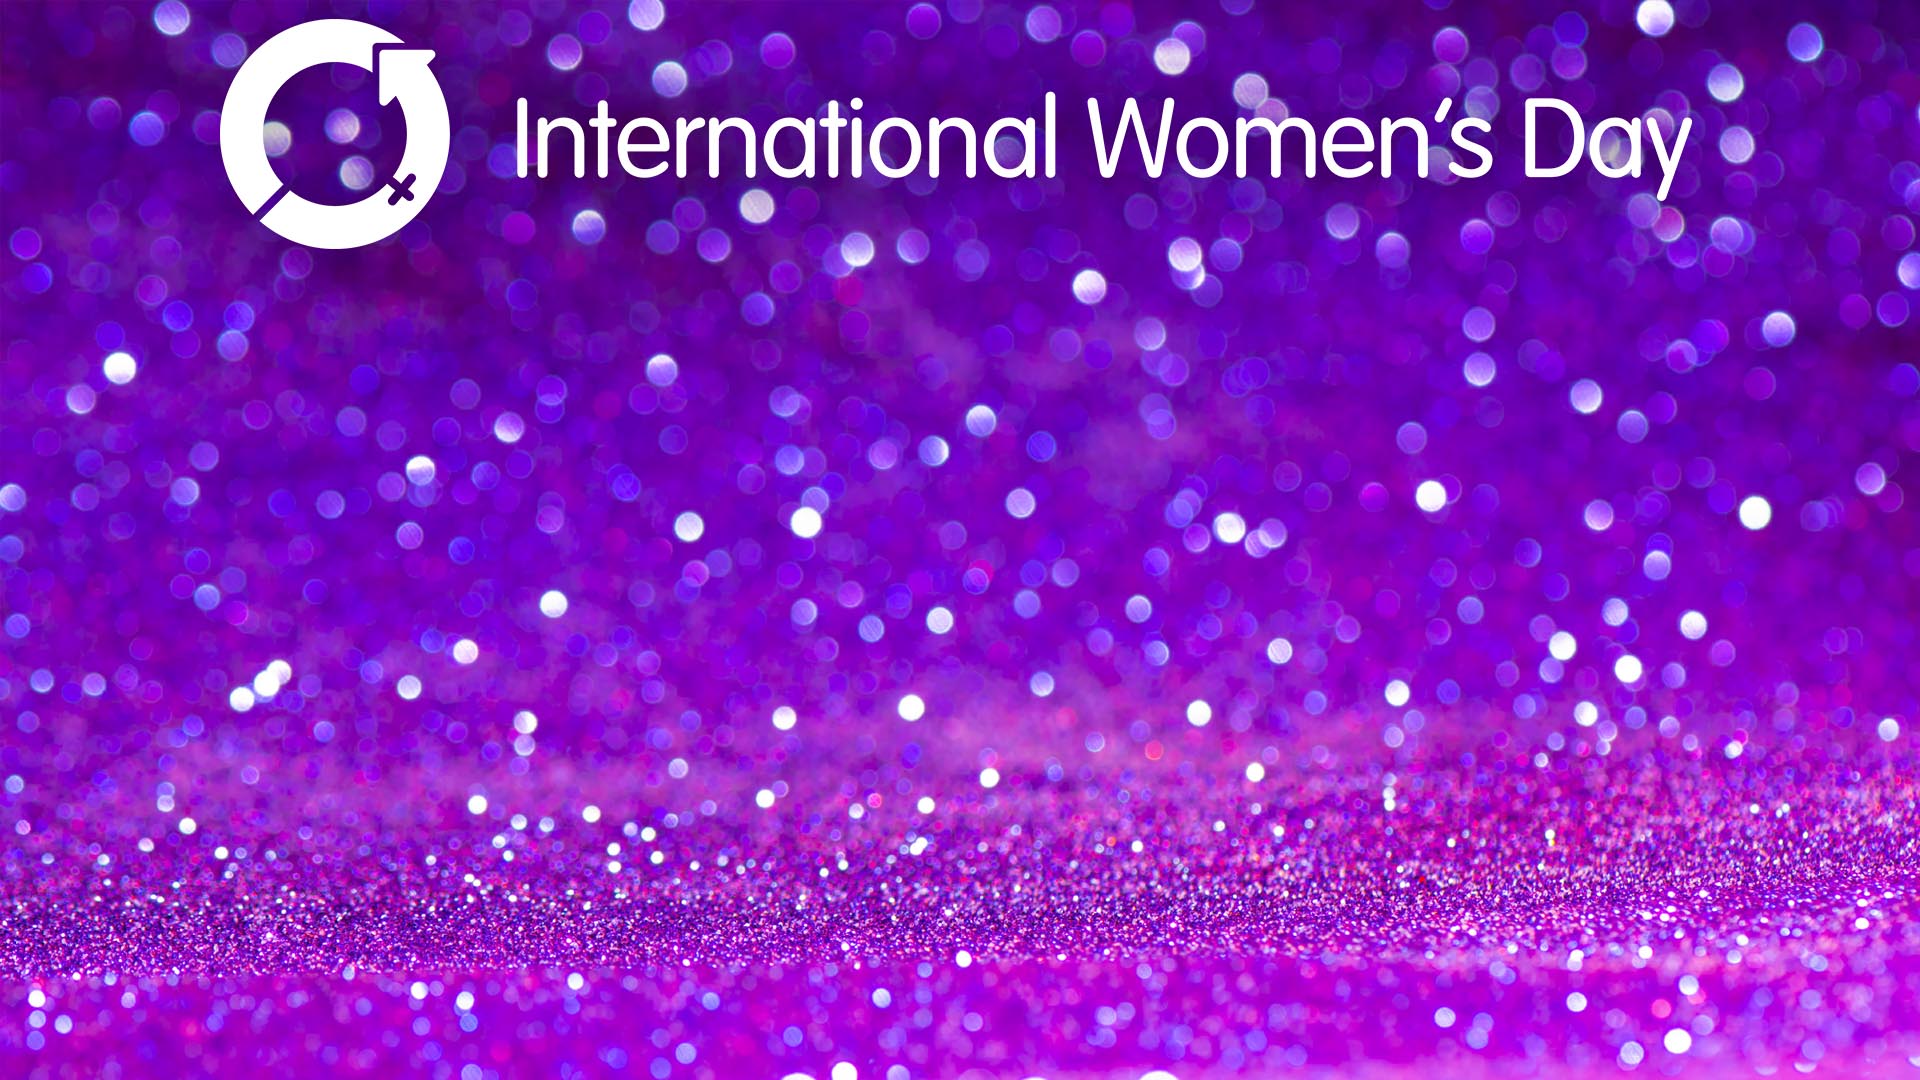 IWD: Download IWD Zoom background or create and share your own